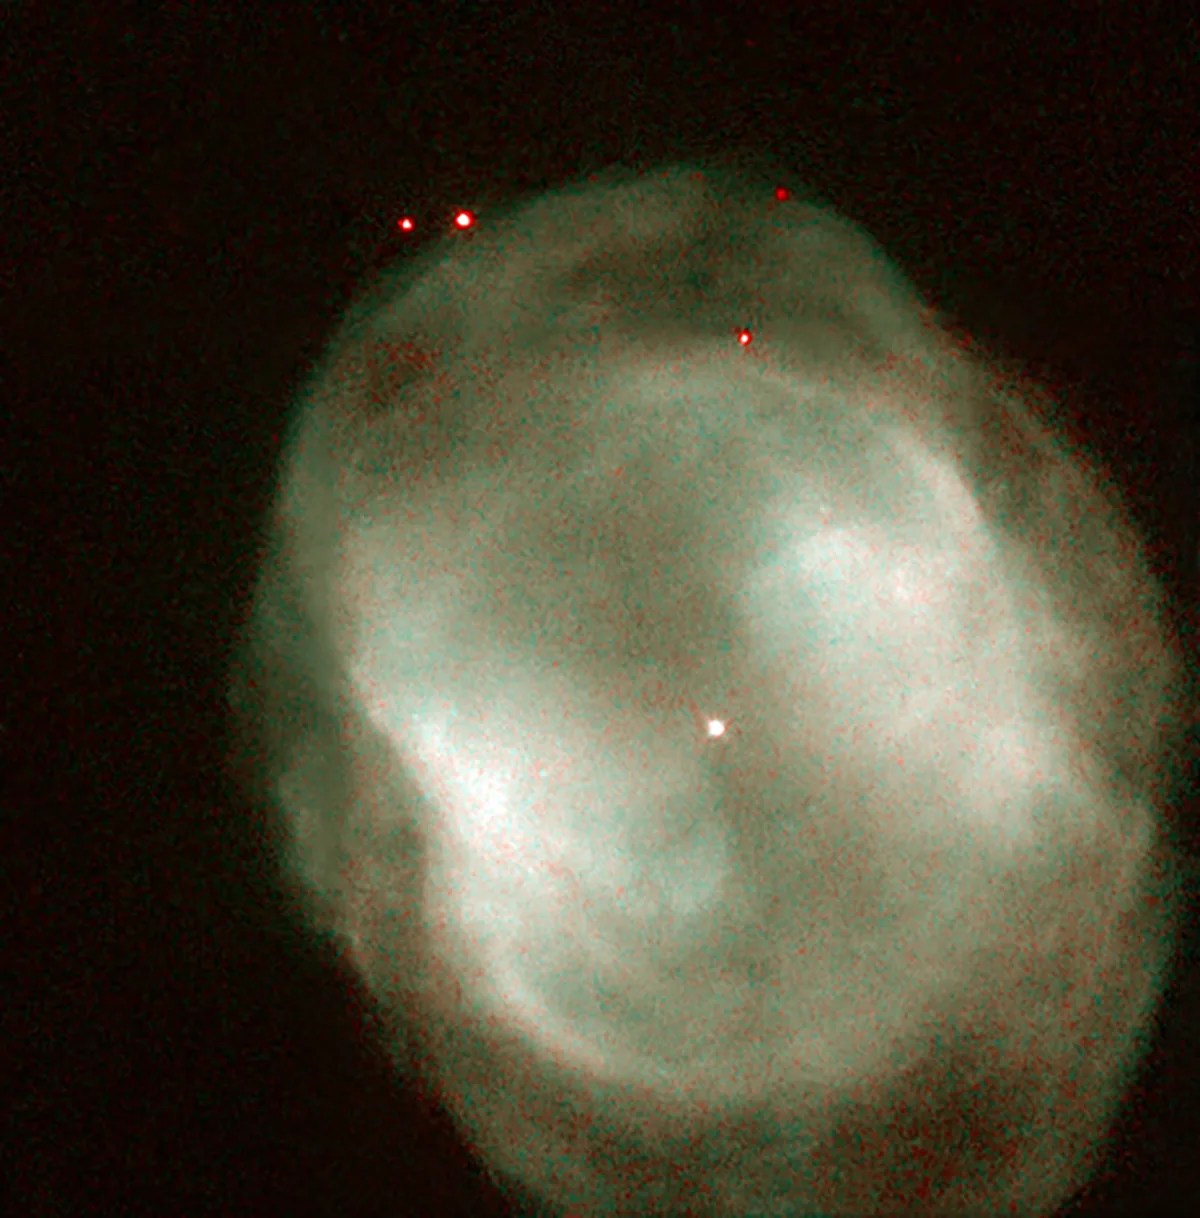 A grayish oval nebula with a star at its center. Four red stars are located near the top of the nebula.